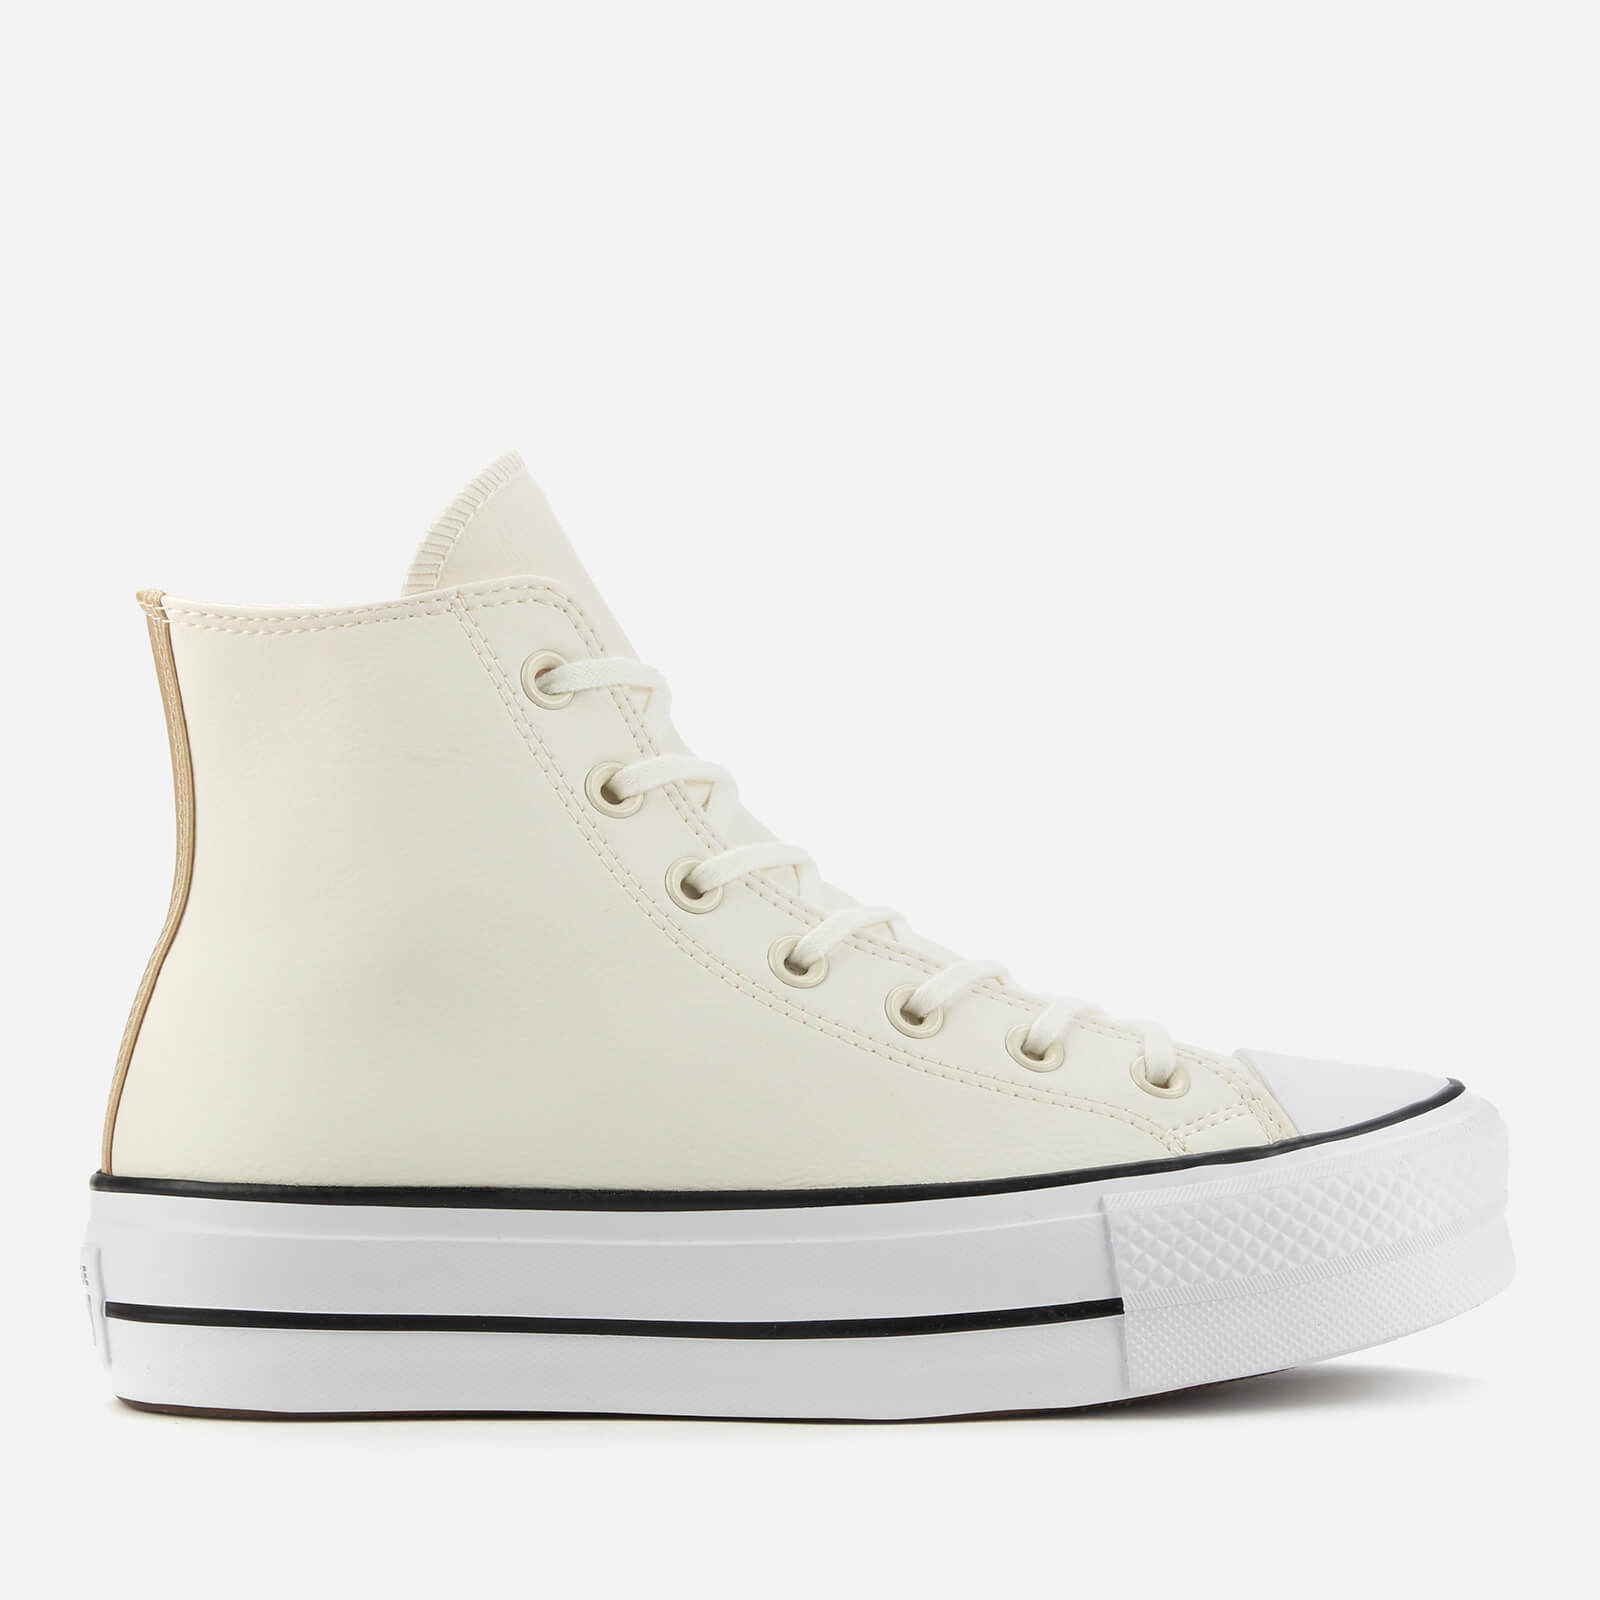 Converse Women's Chuck Taylor All Star Anodized Metals Leather Lift Hi-Top Trainers - Egret - UK 7